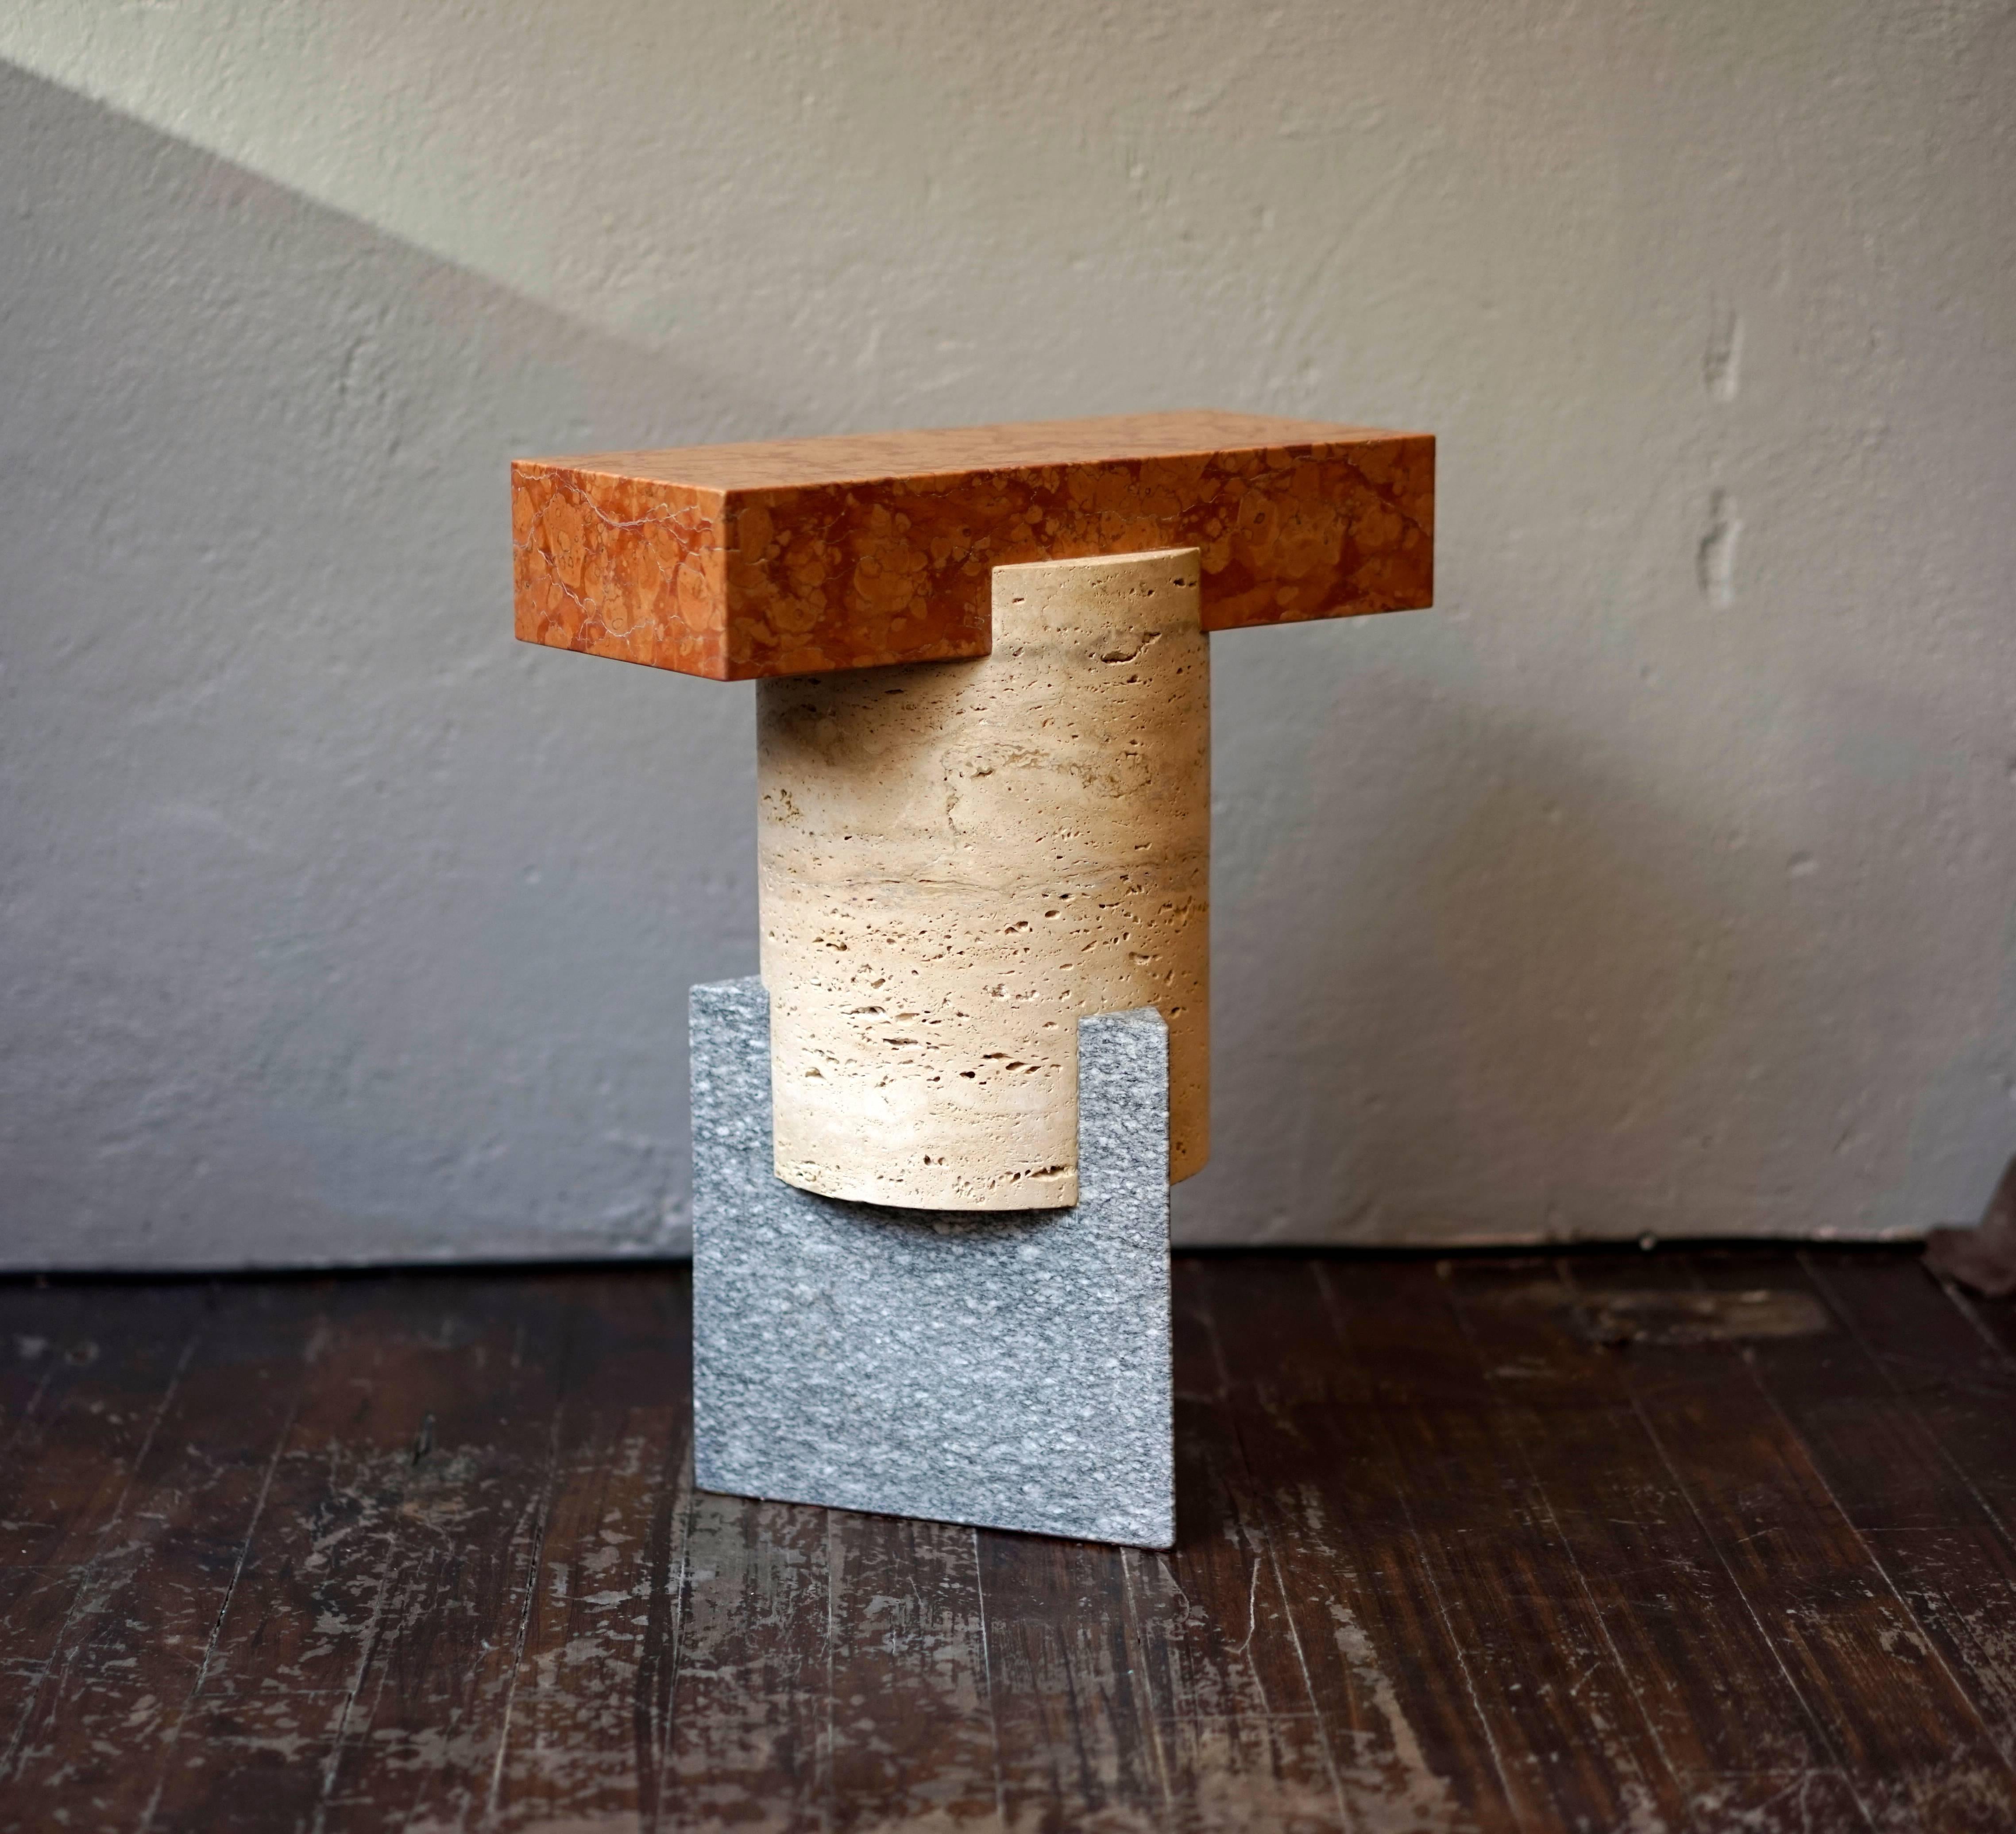 Tuskan stool, part of the Kapital Collection by Oeuffice
Limited edition of 12
Handcrafted in Italy, from three different stones: Rosso Verona Marble, Roman Travertine, Luzerna stone


A series of limited edition stools based on essential